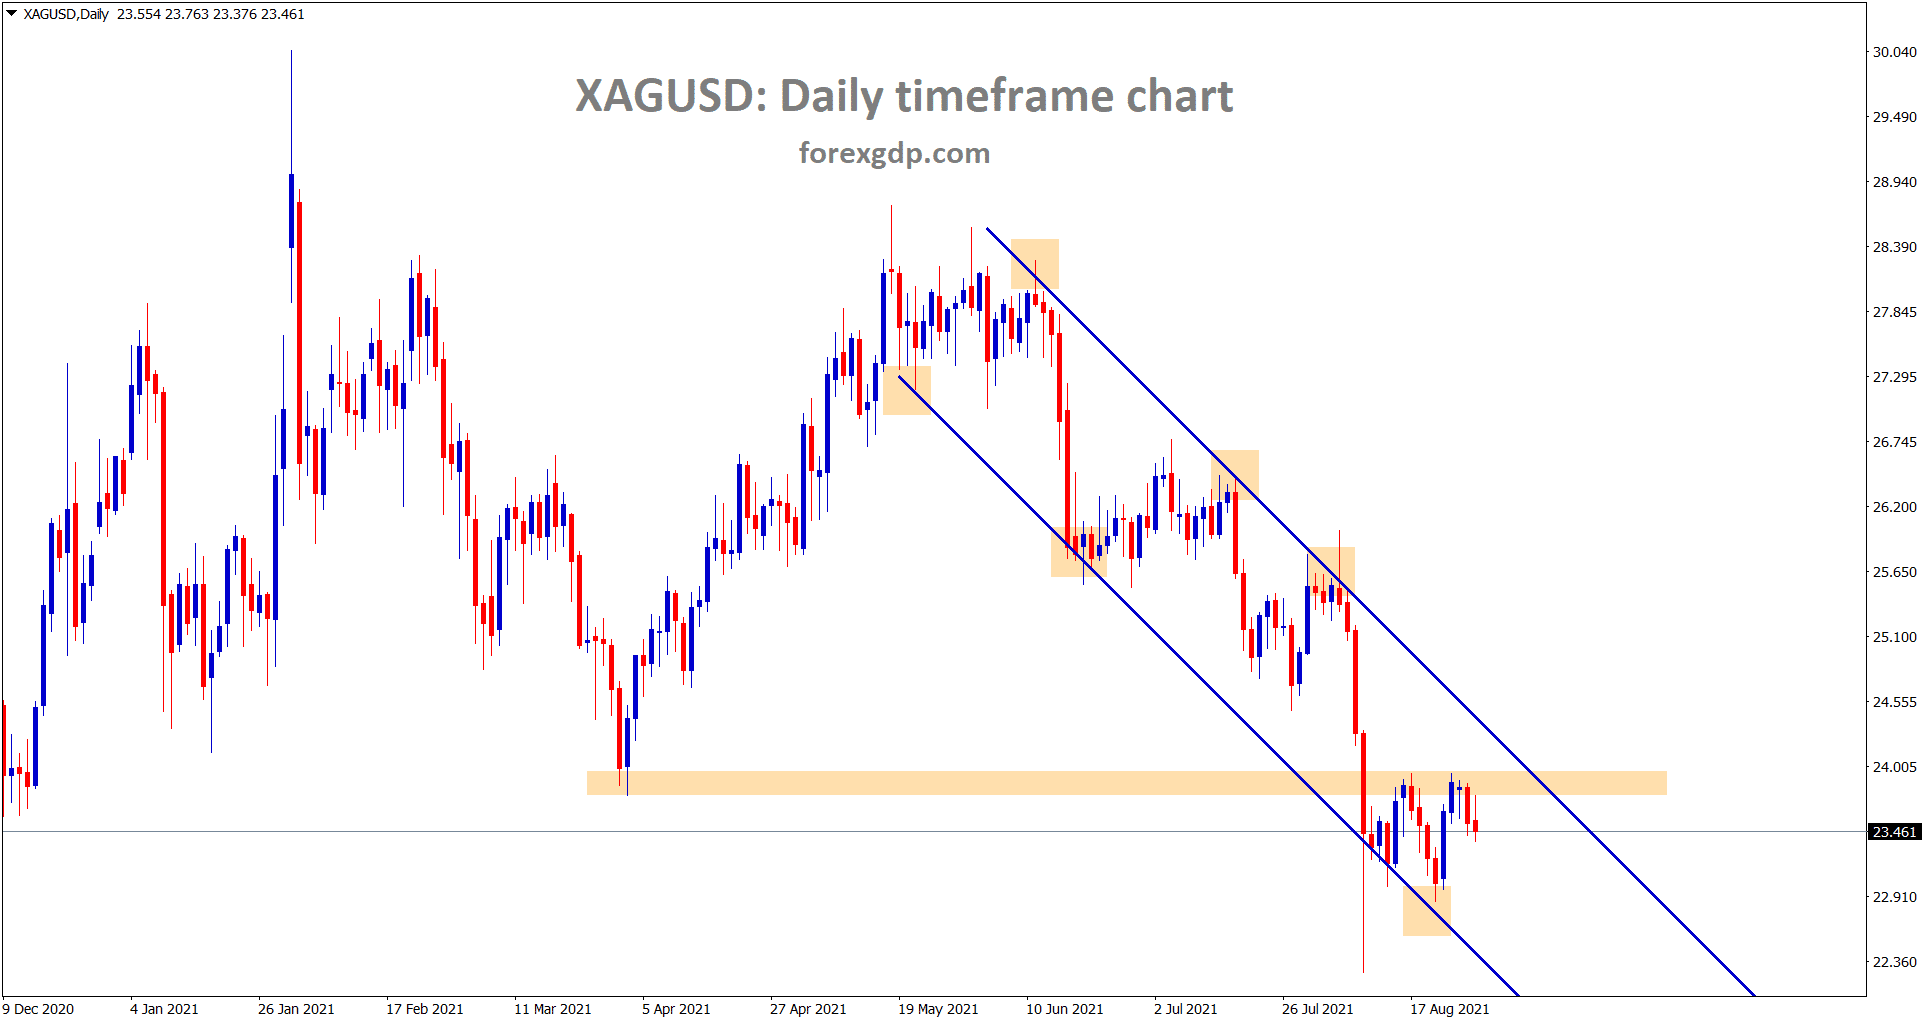 Silver XAGUSD starts to fall from the recent resistance